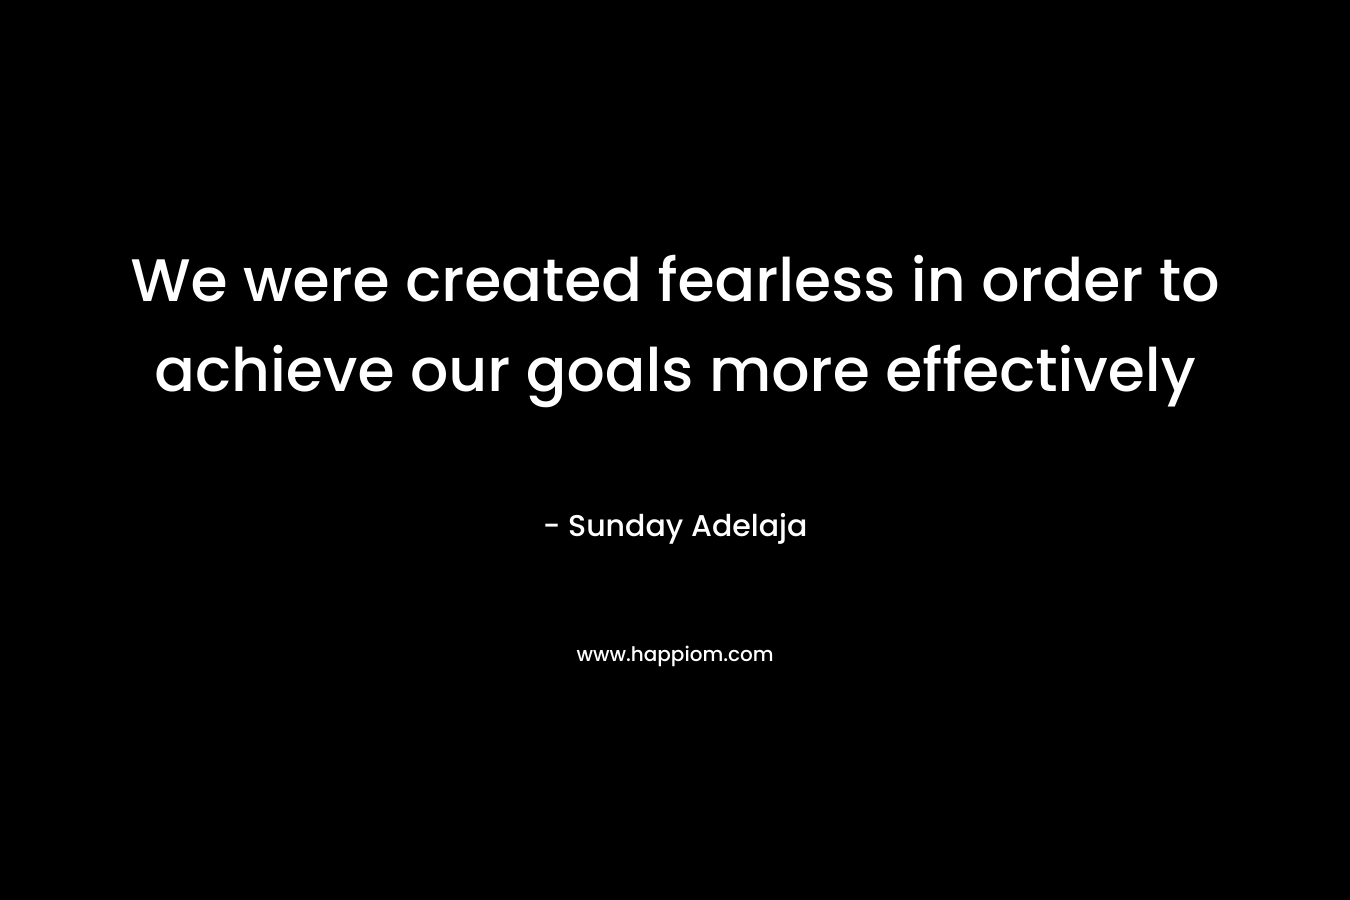 We were created fearless in order to achieve our goals more effectively